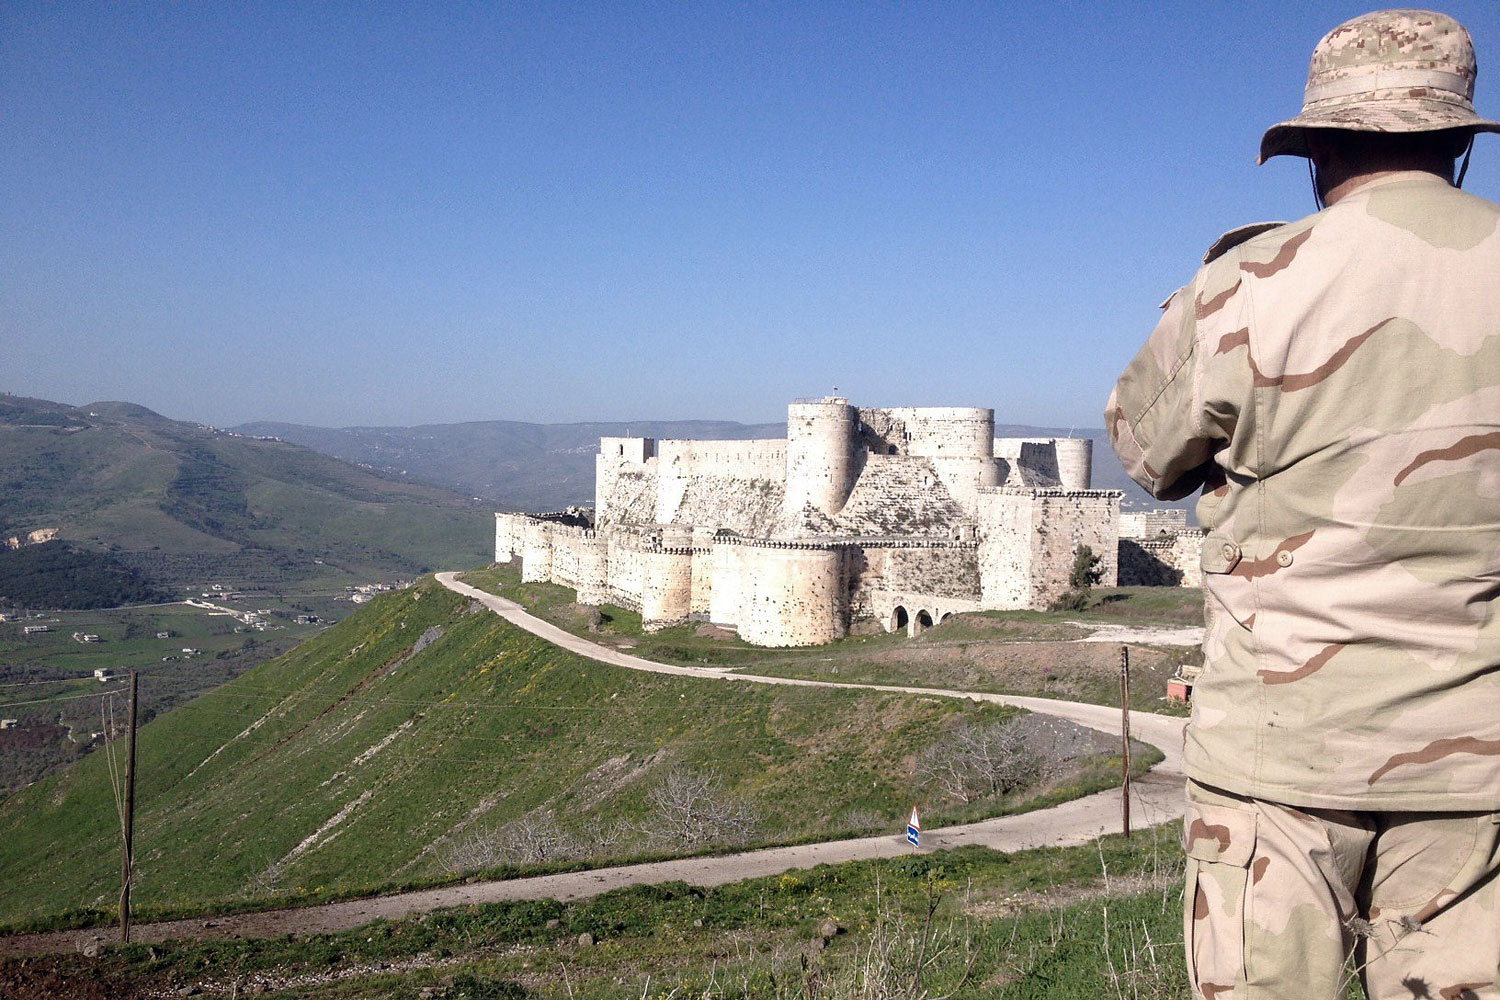 A government soldier looks out over the renowned Crusader castle Krak des Chevaliers near the Syria-Lebanon border after forces loyal to Syria's President Bashar al-Assad seized the fortress on March 20, 2014. (Sam Skaine—AFP/Getty Images)